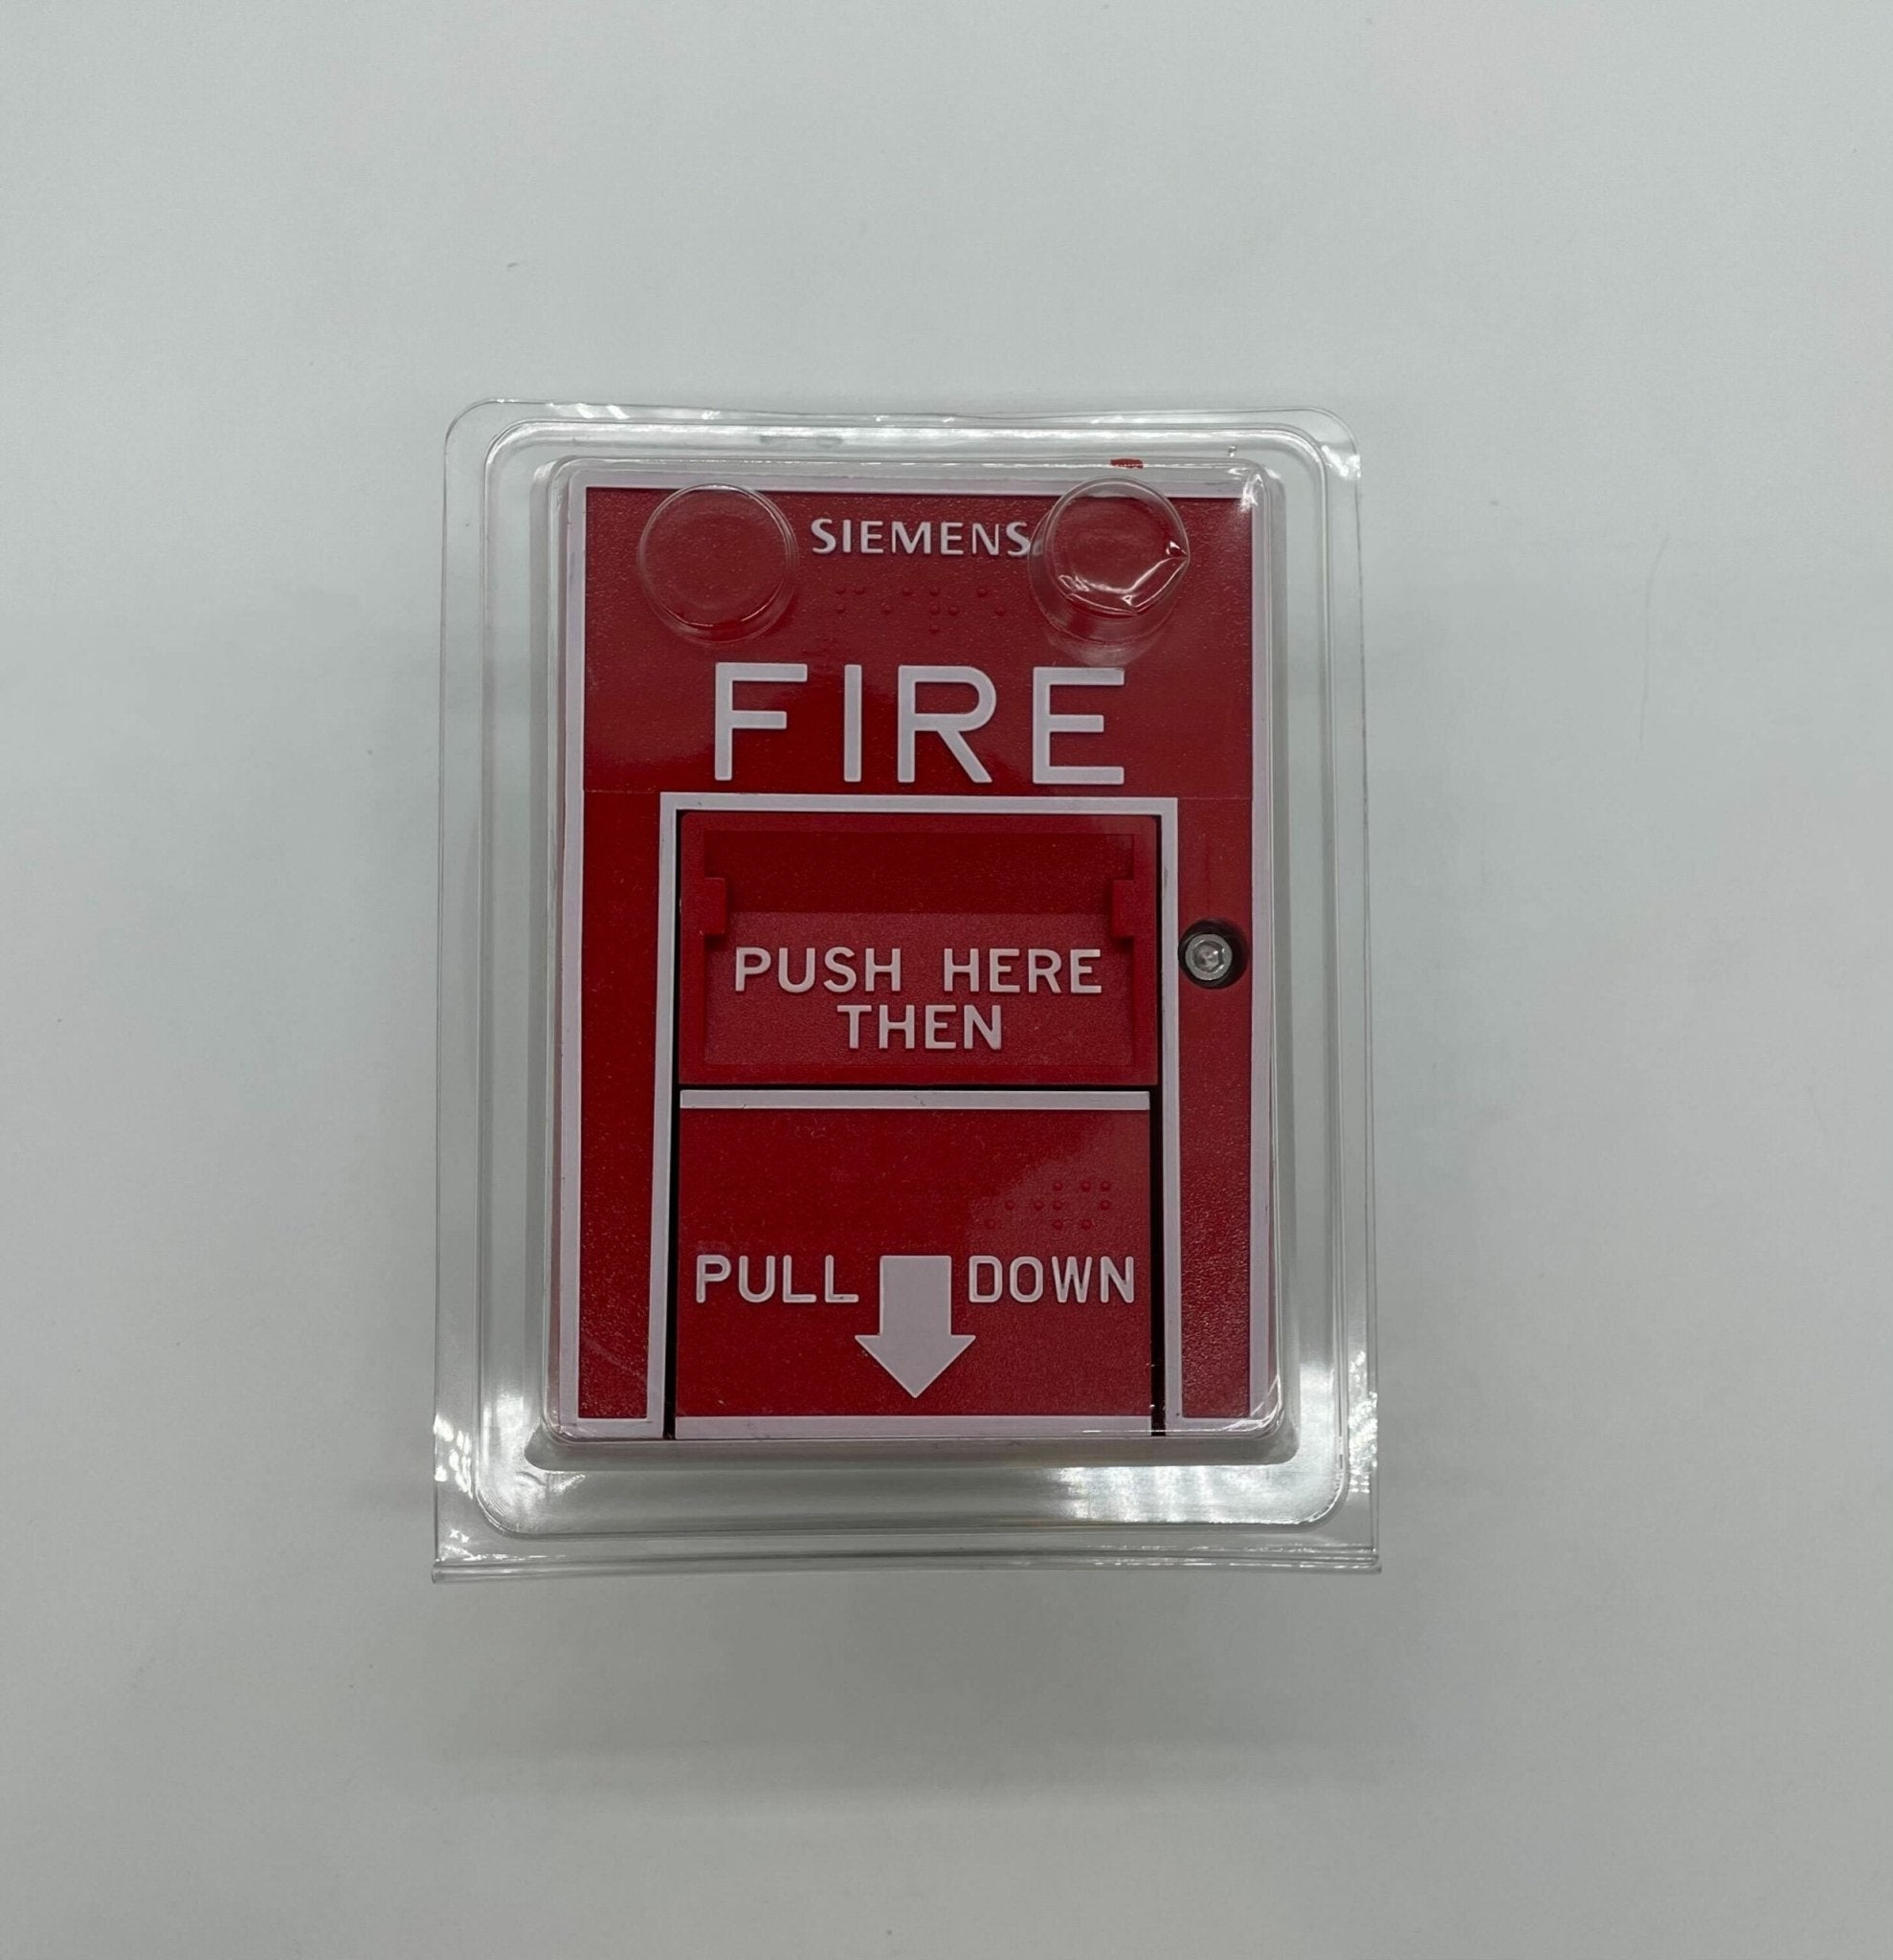 Siemens HMS-D Intelligent Dual Action Pull Station - The Fire Alarm Supplier